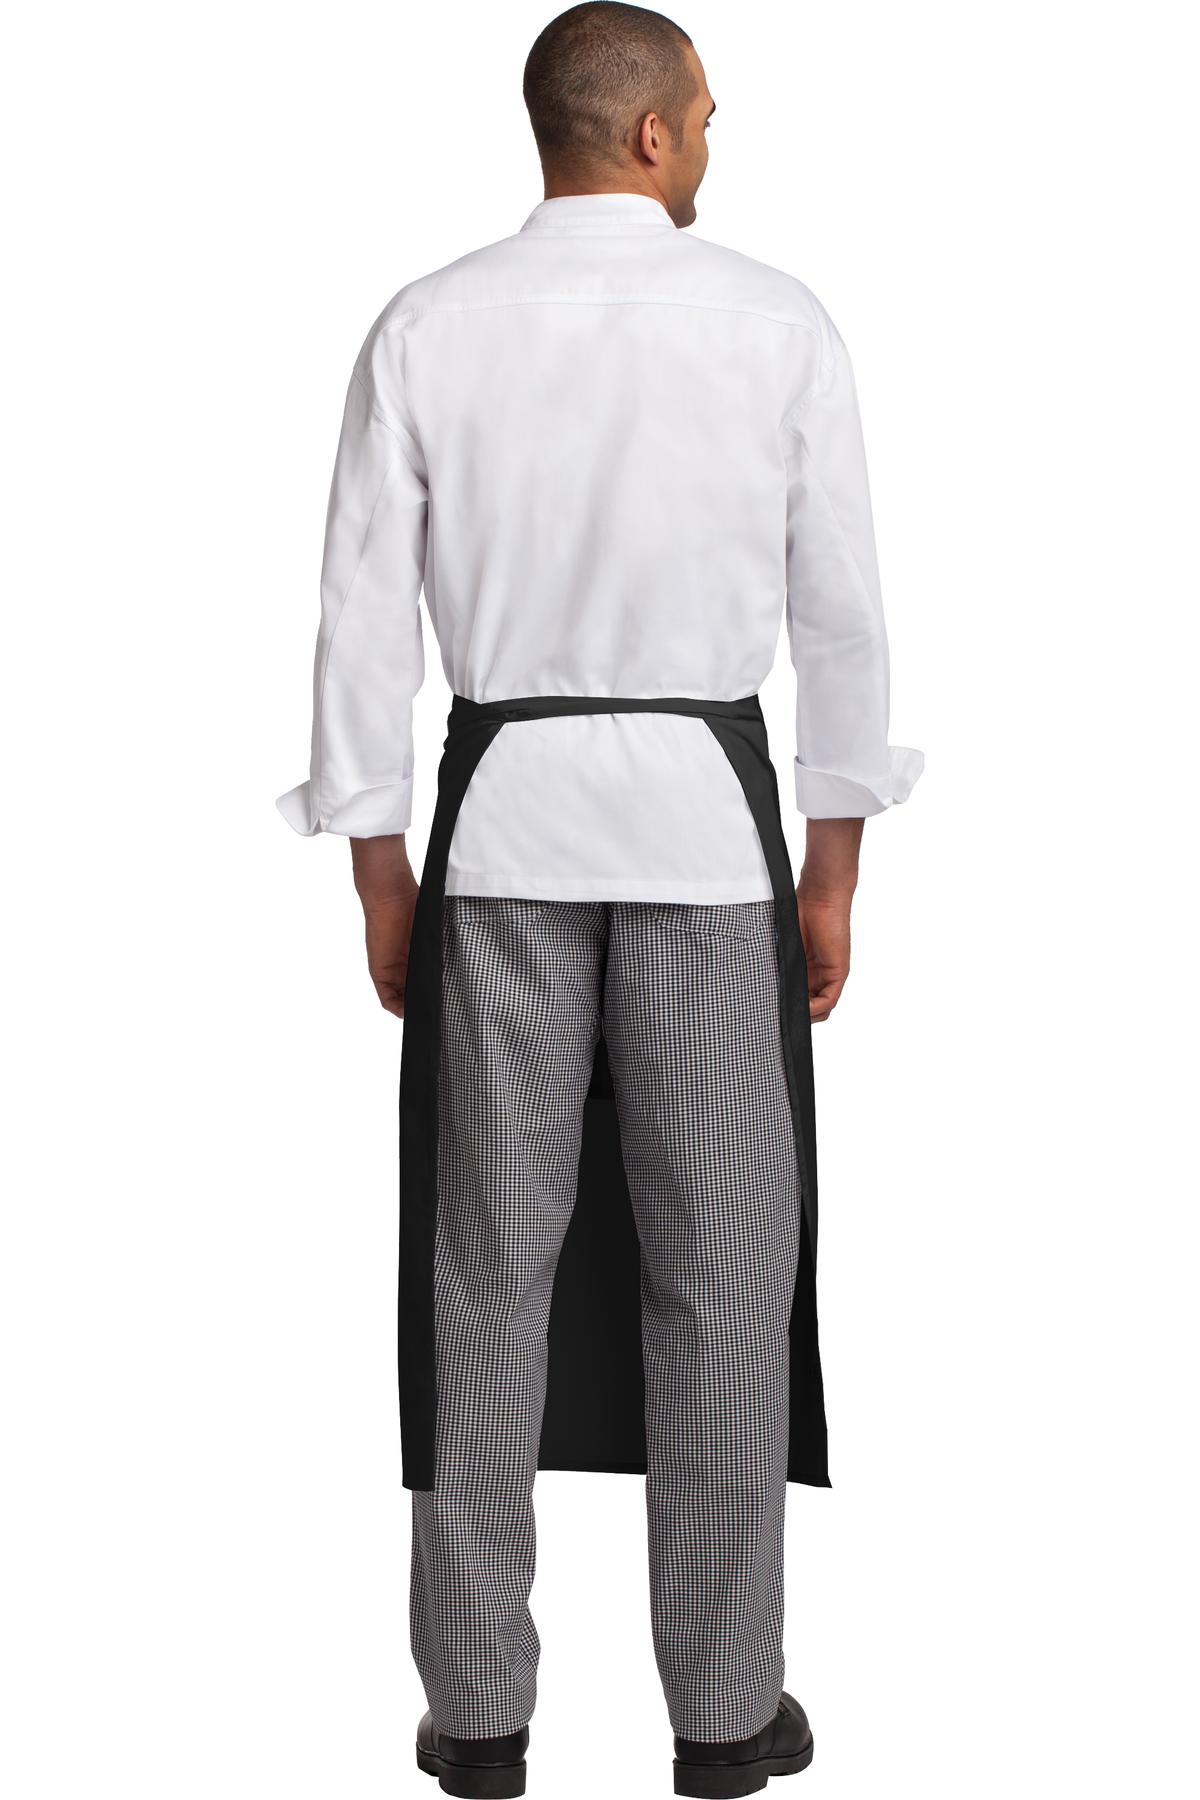 Port Authority® Easy Care Full Bistro Apron with Stain Release. A701 - DFW Impression